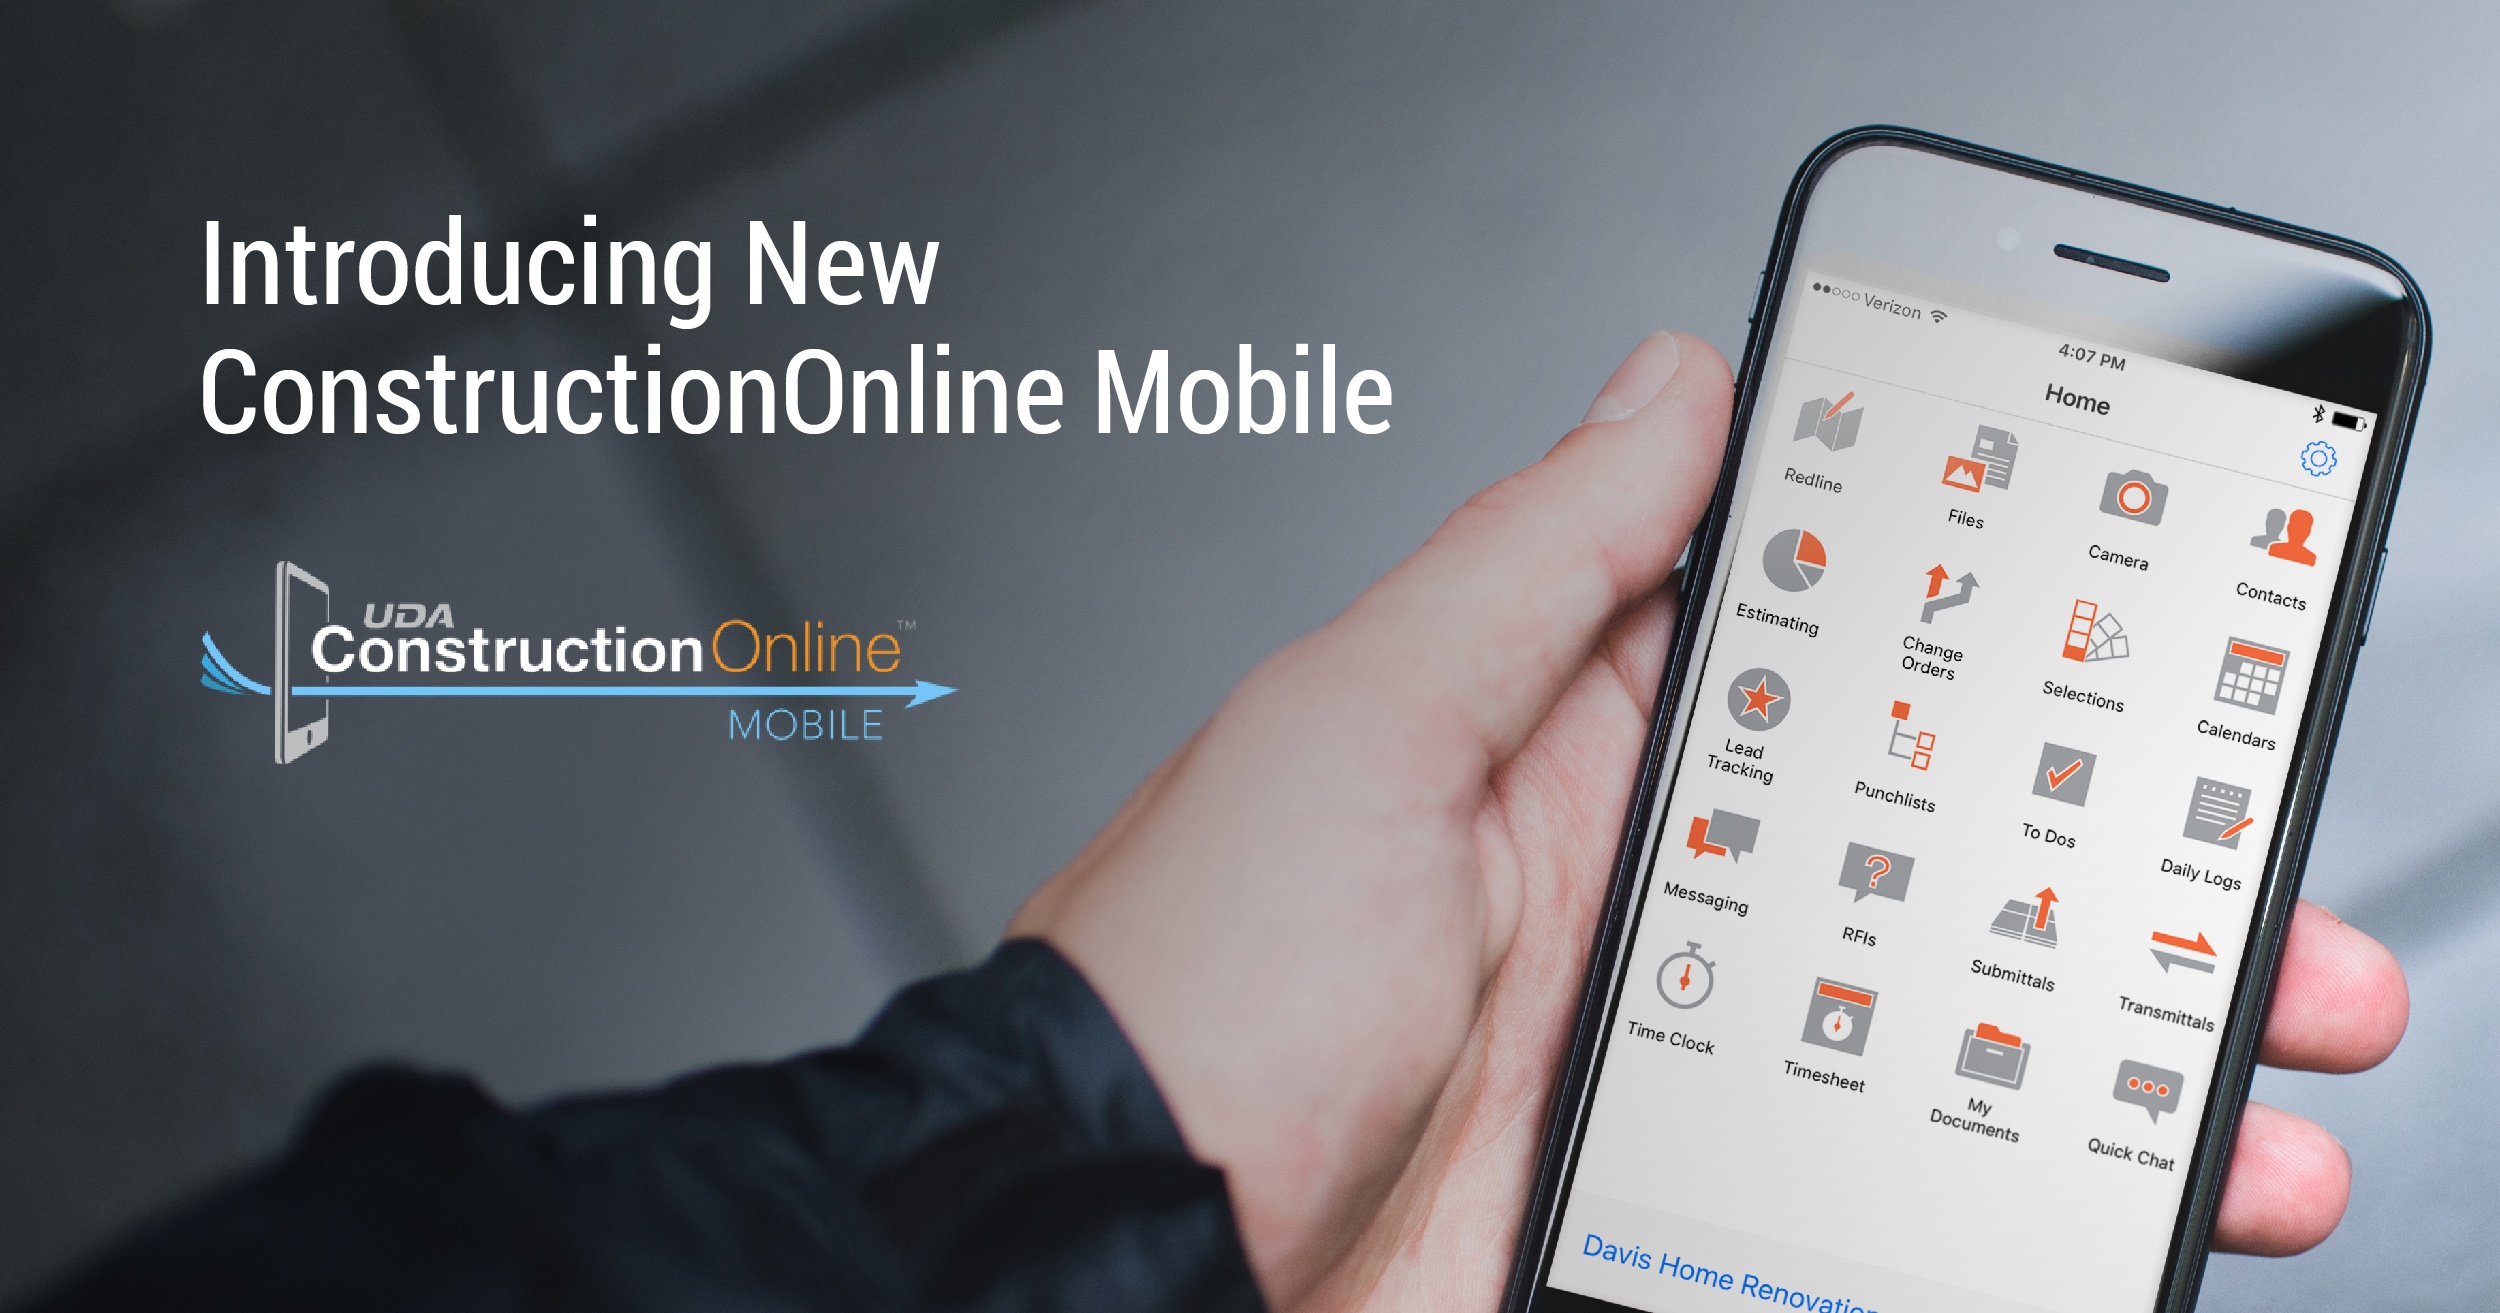 Introducing the ConstructionOnline Mobile App